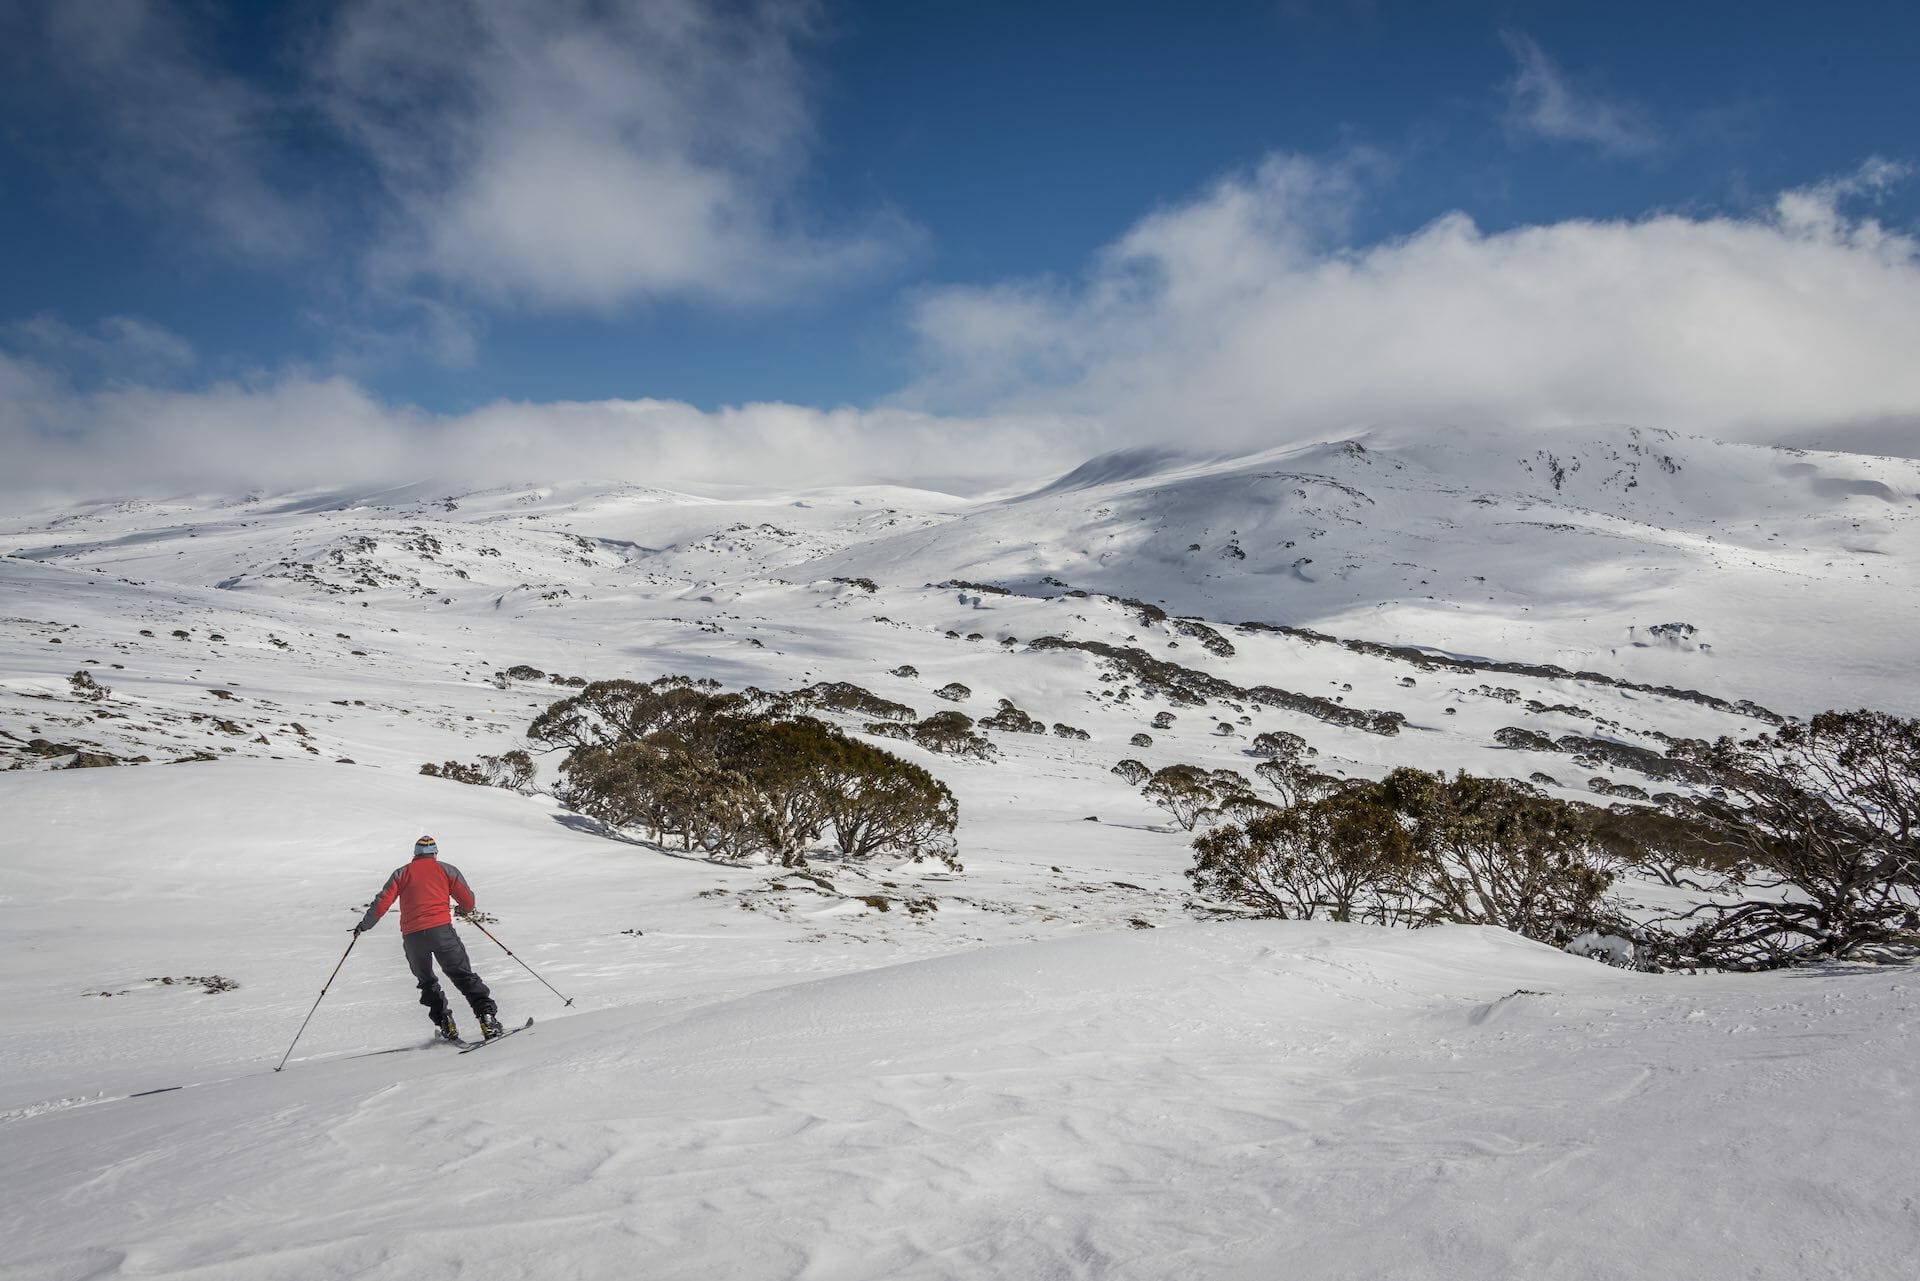 Skip The Line This Snow Season & Buy Your All Parks Pass Online!, phtoo supplied by NPWS, skiier, Perisher, snow, skiing